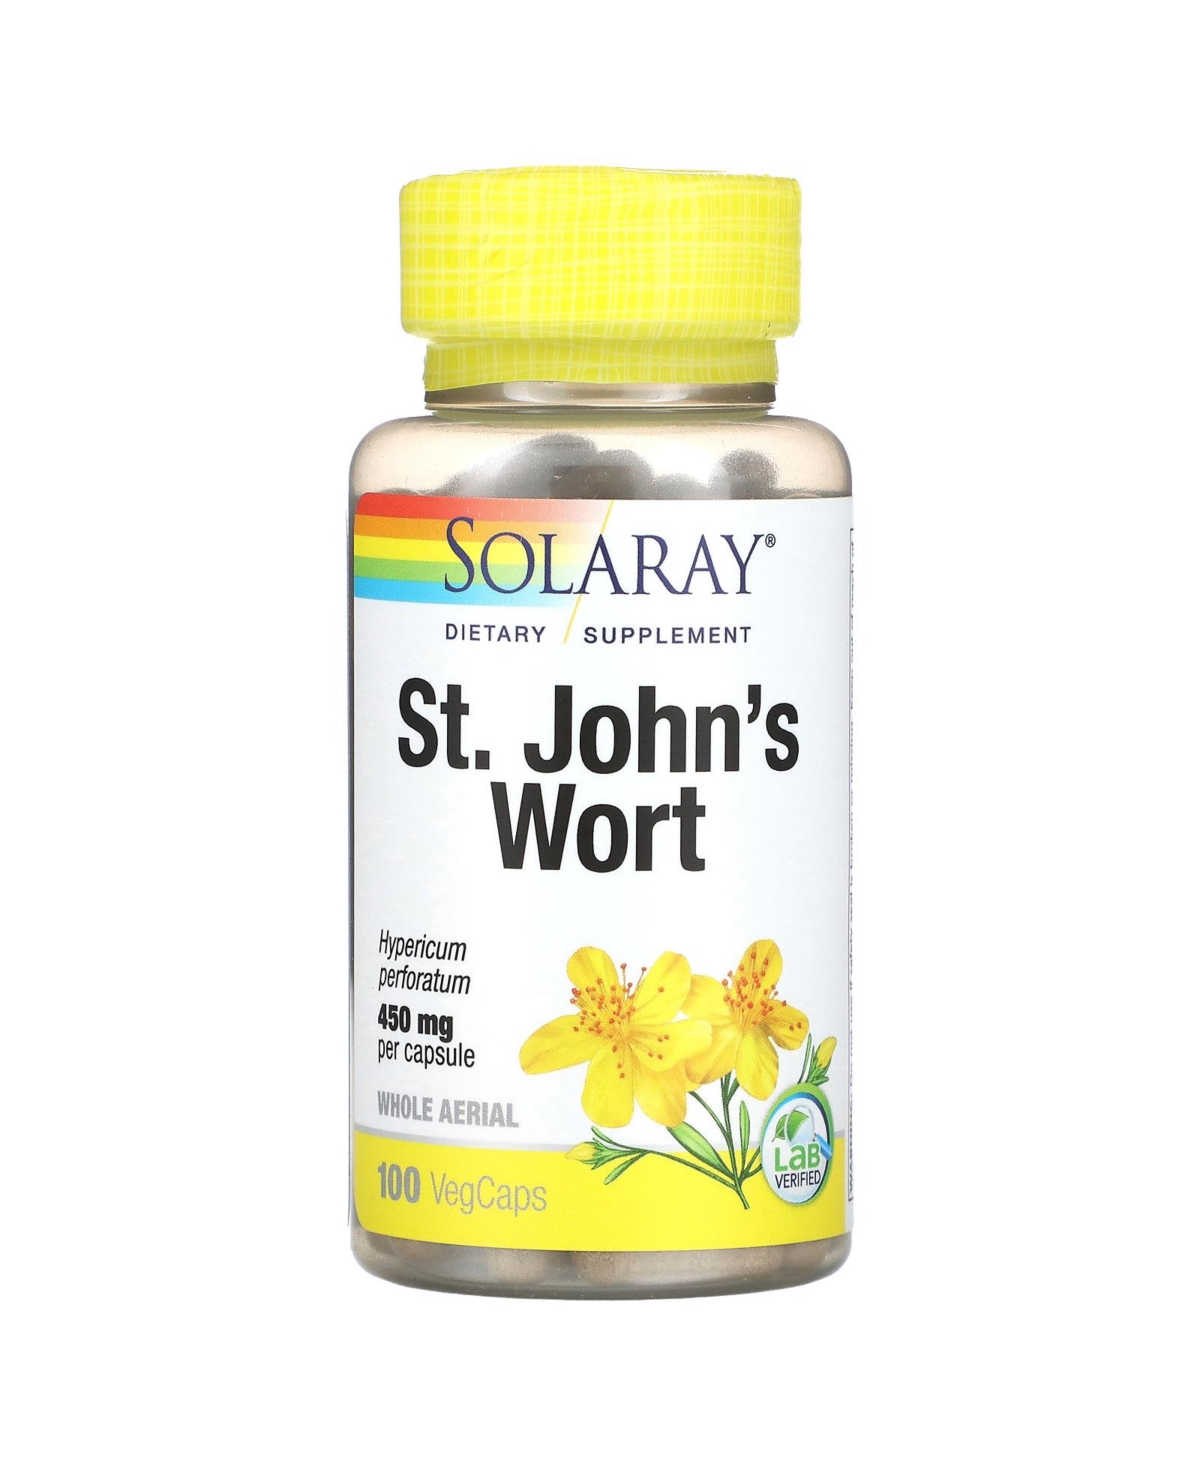 St. John's Wort 450 mg - 100 VegCaps - Assorted Pre-pack (See Table